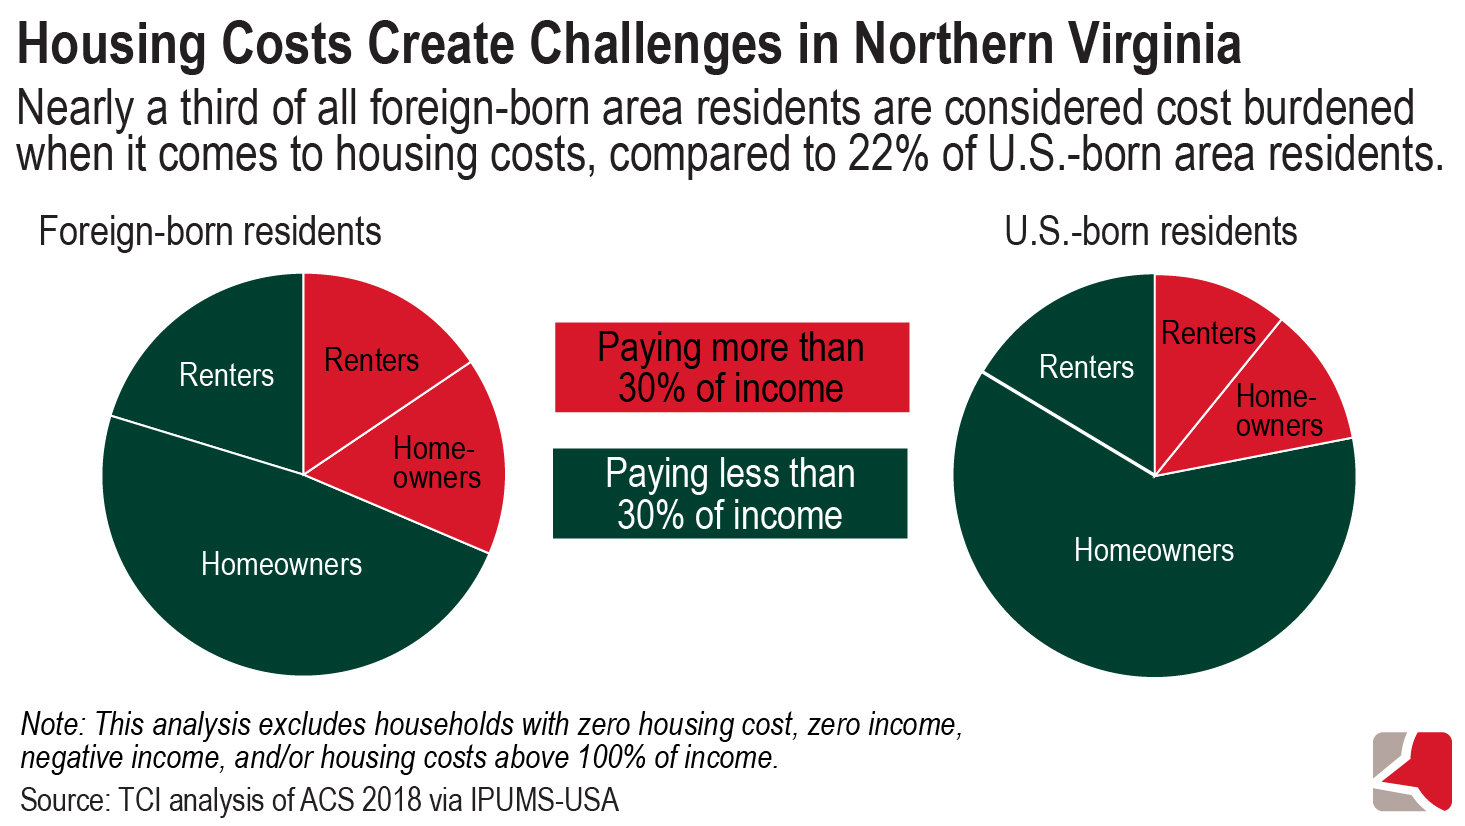 Two circle graphs showing average share of income paid toward housing for foreign-born and U.S. born residents in Northern Virginia.  Nearly one third of all foreign-born area residents are considered cost-burdened when it comes to housing, compared to 22% of U.S. born residents based on analysis of ACS 2018 data via IPUMS-USA